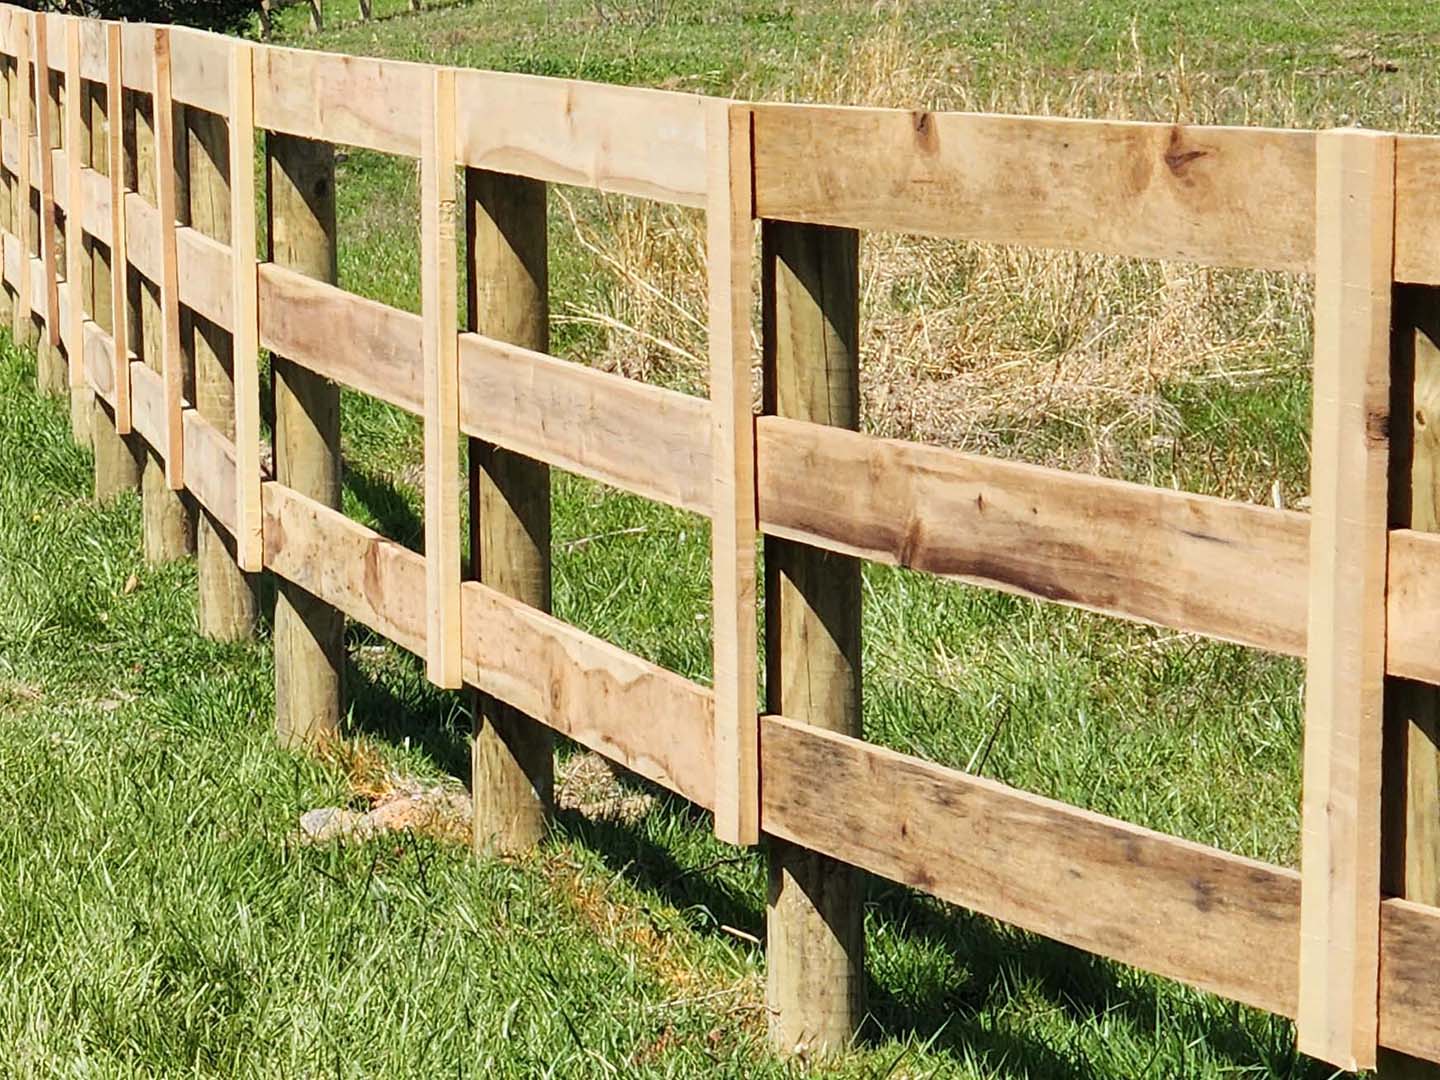 Martinsville residential and agricultural fencing options